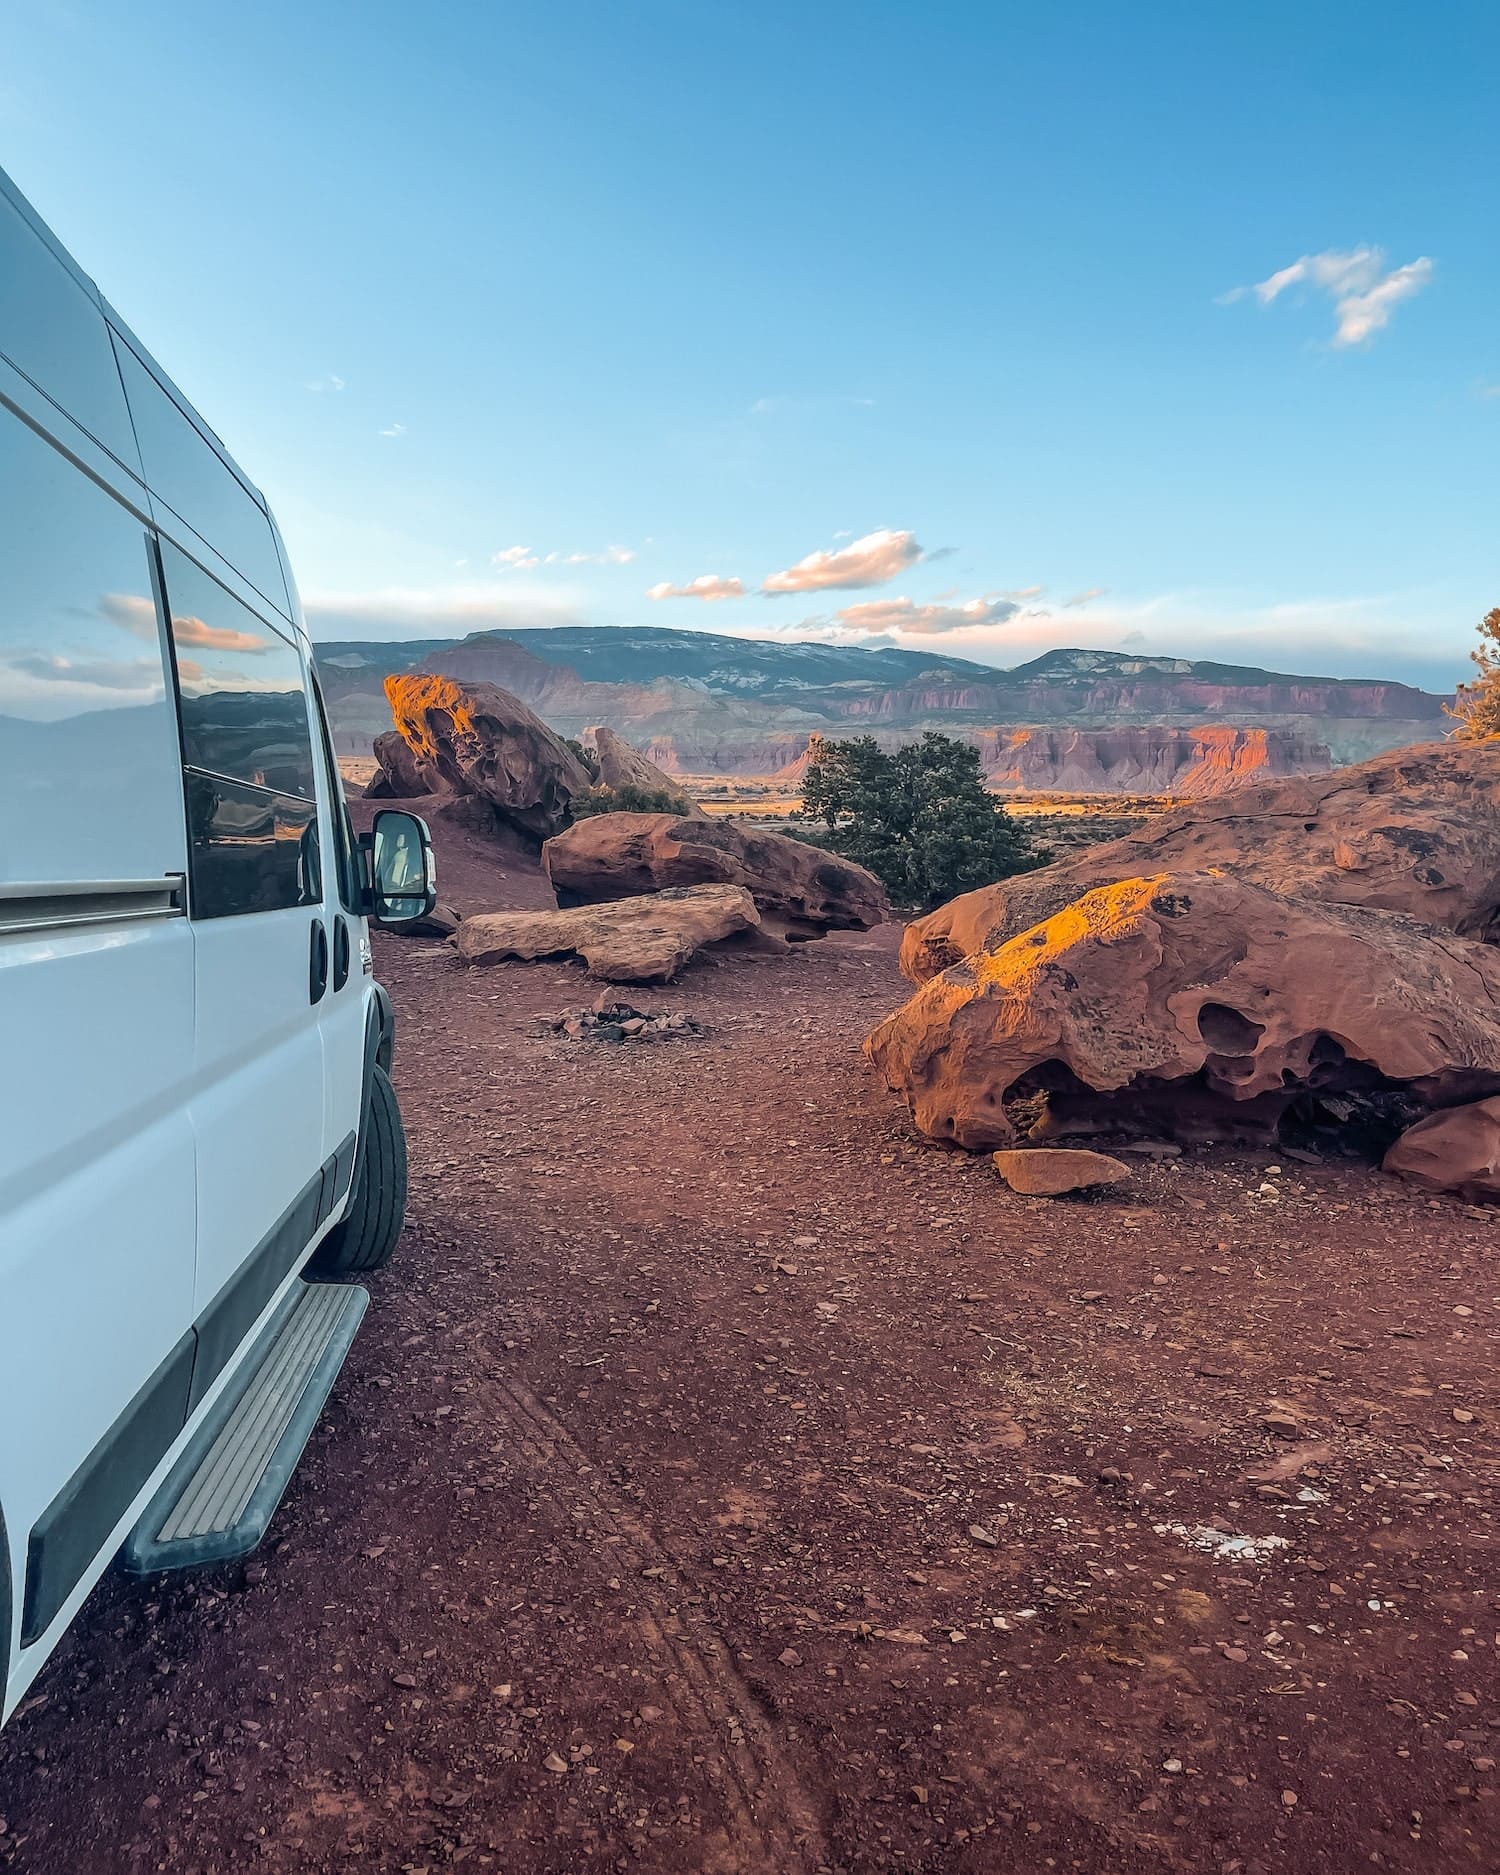 Van at campsite outside of Capitol Reef National Park